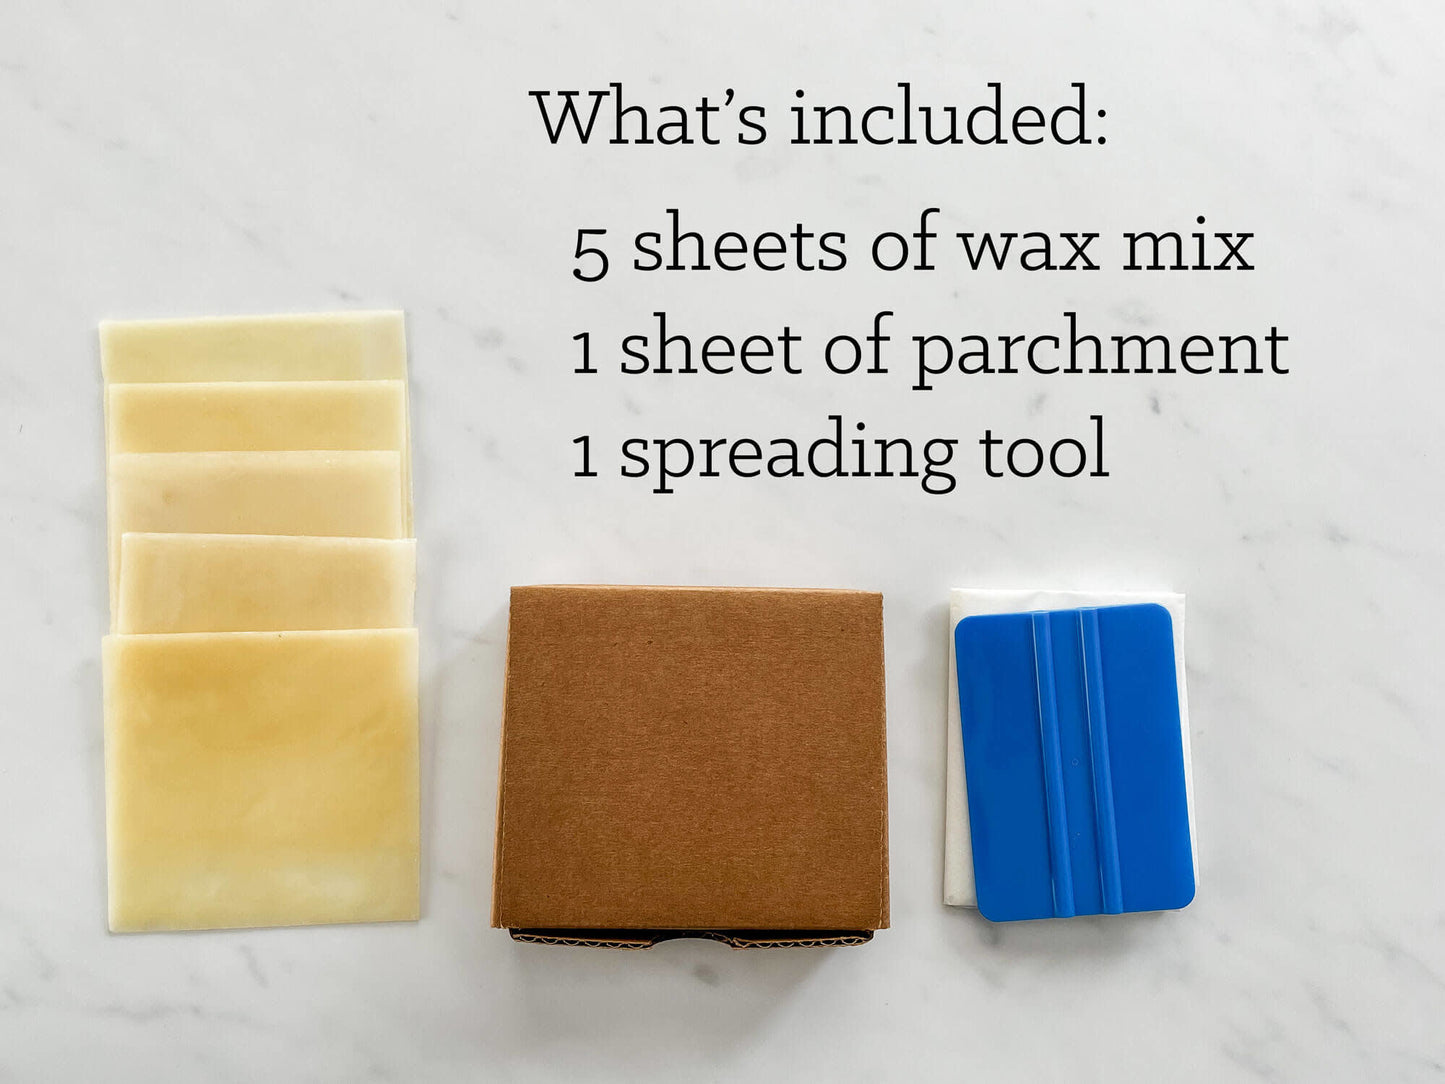 DIY beeswax food wrap kit with 5 beeswax sheets, 1 piece of parchment paper, and spreading tool